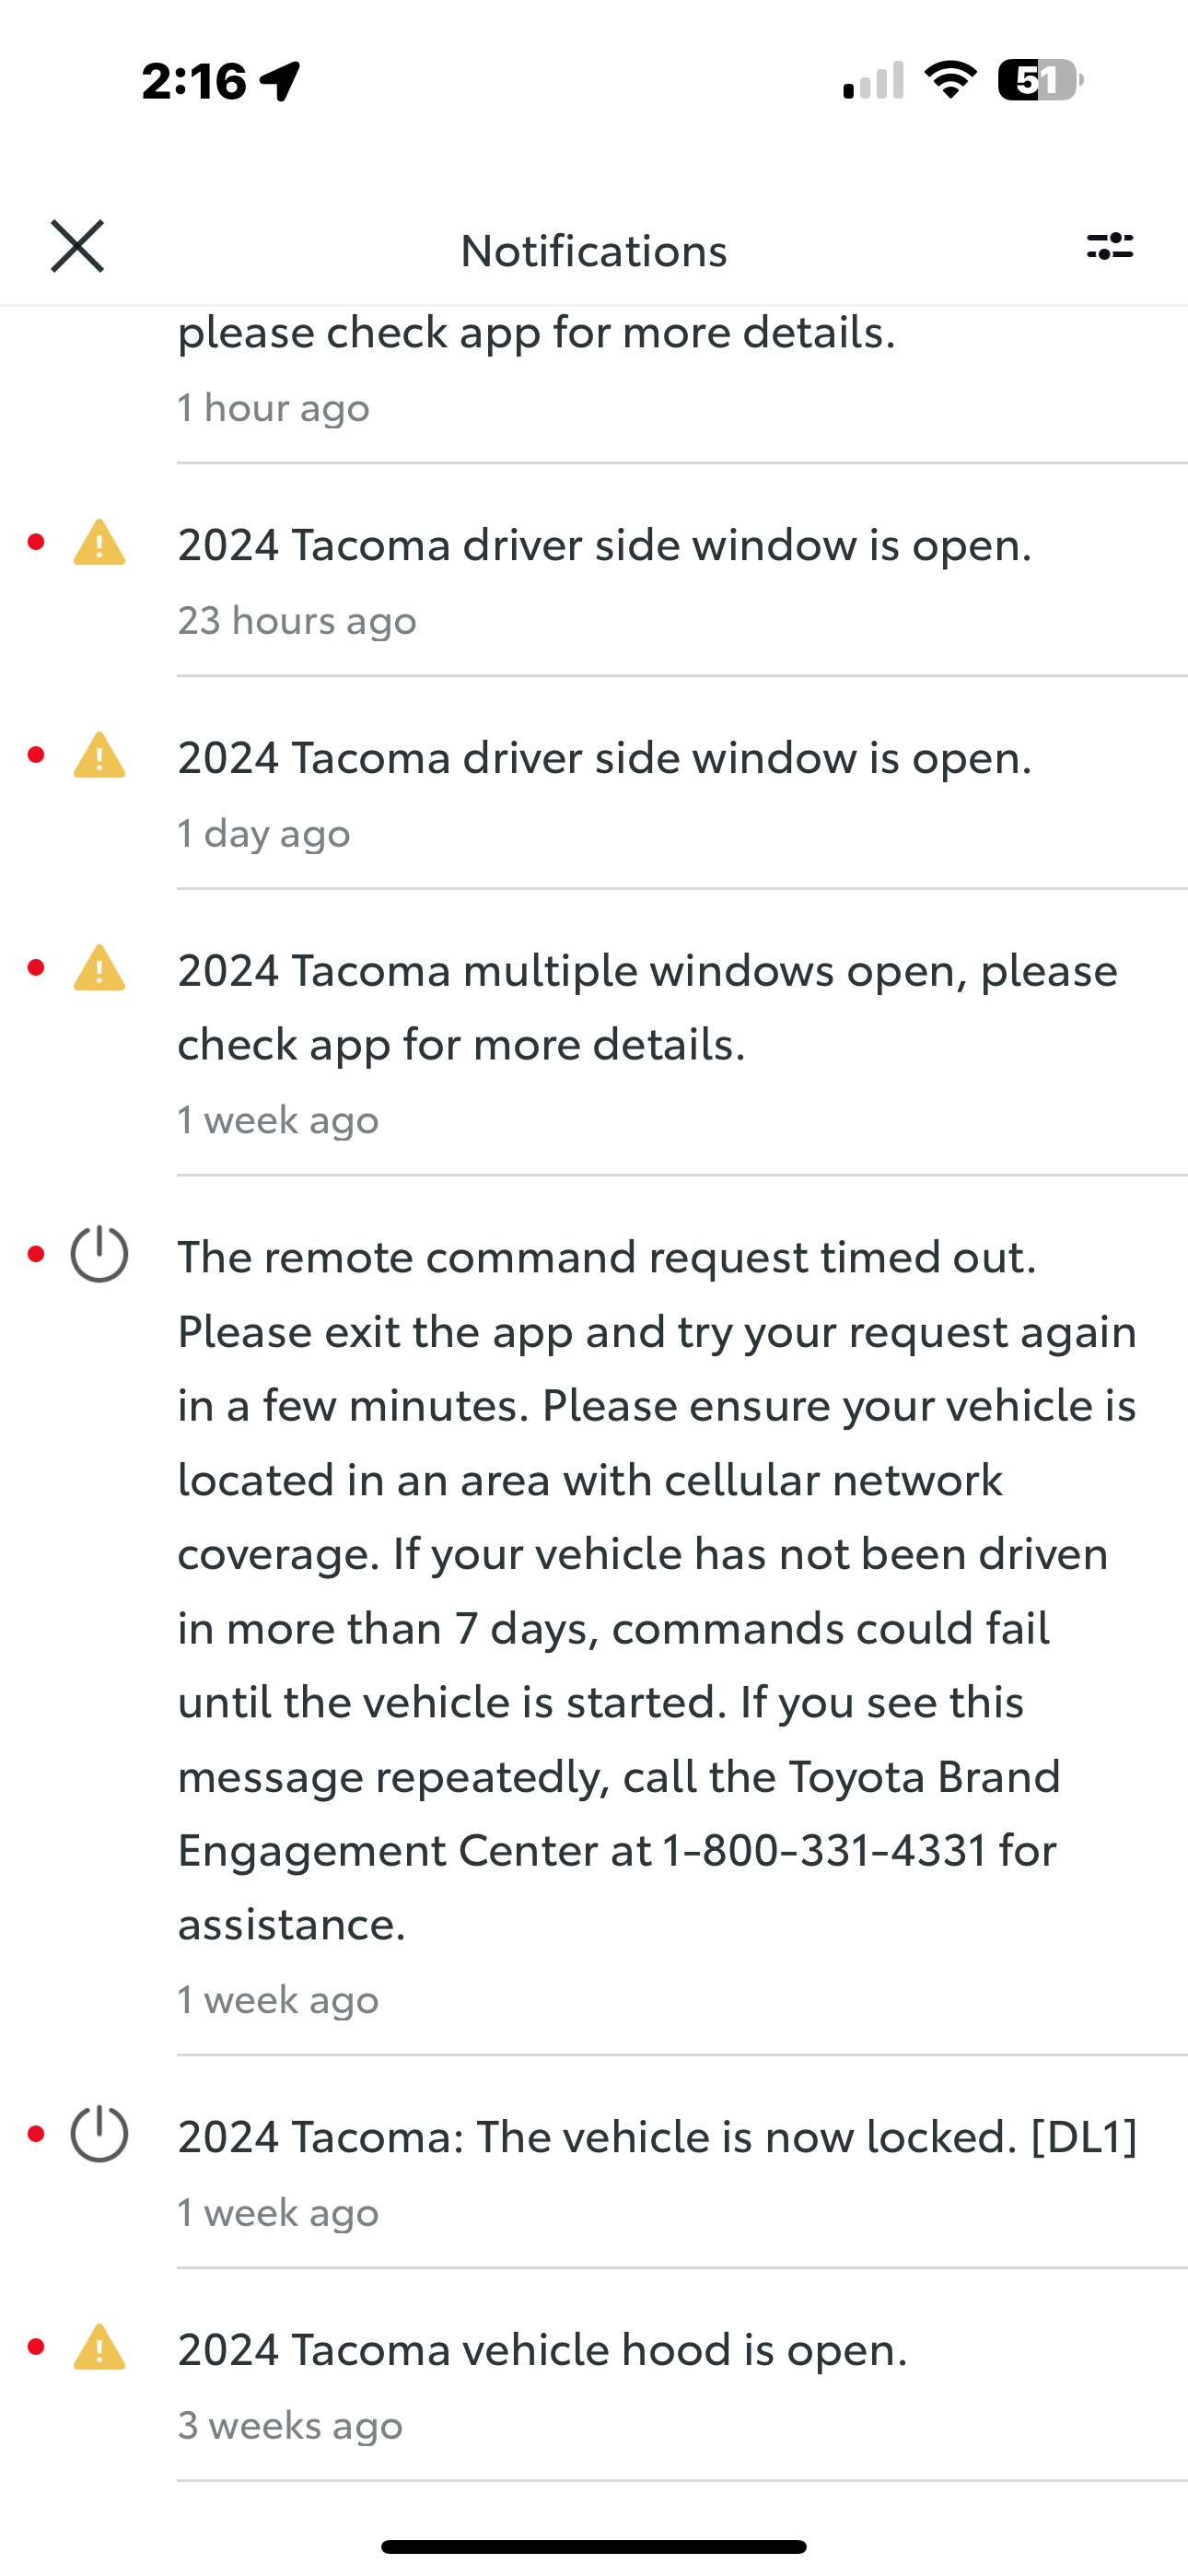 2024 Tacoma Toyota app, does your notifications show 12860